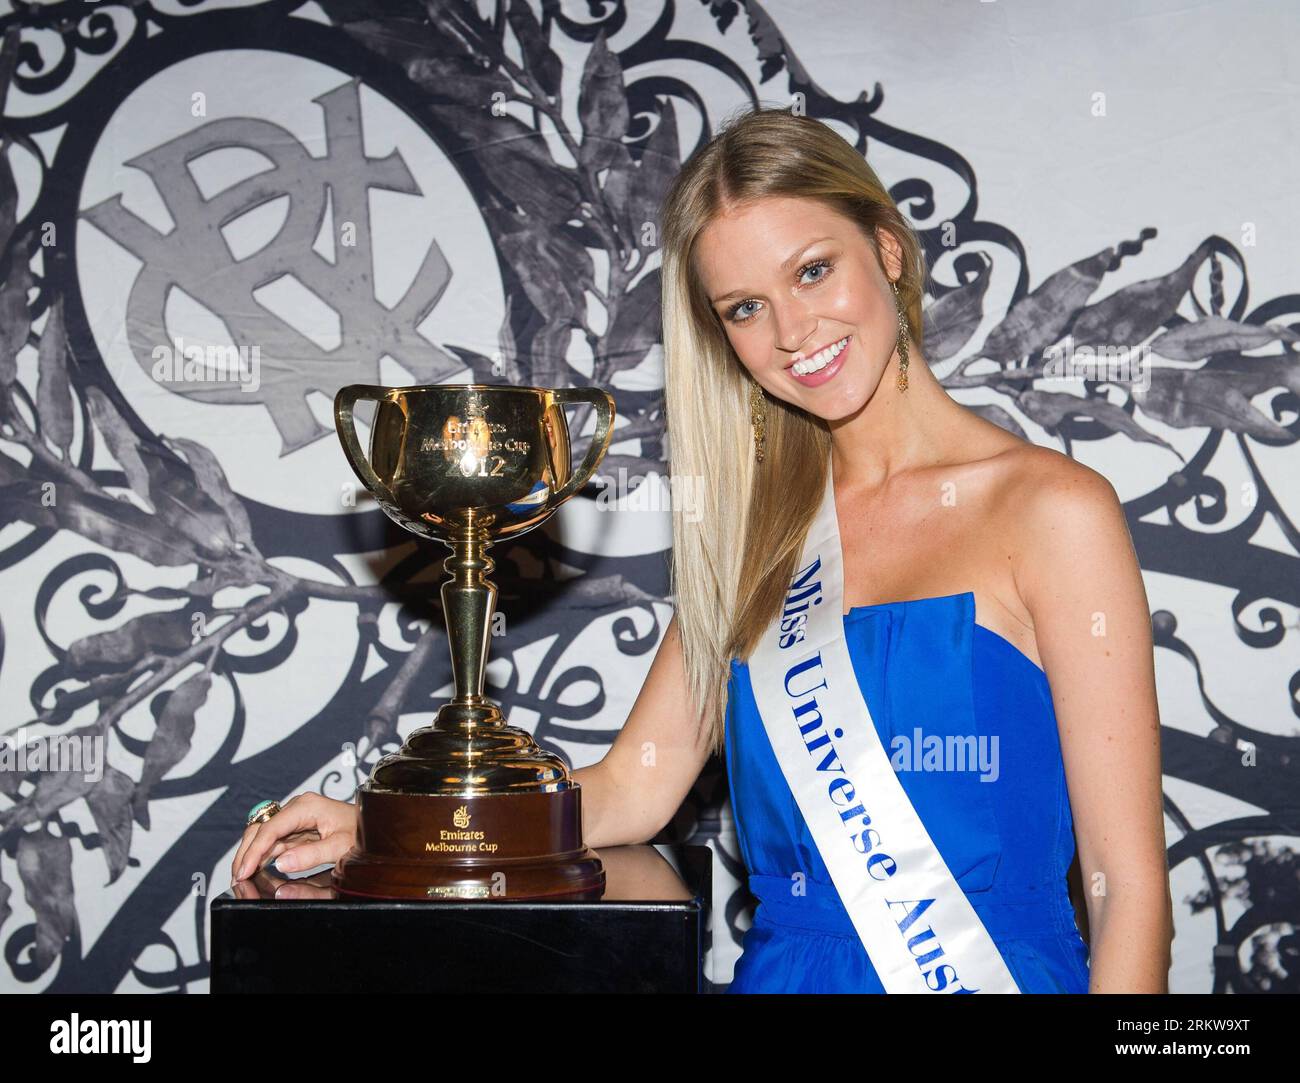 Bildnummer: 58647097  Datum: 29.10.2012  Copyright: imago/Xinhua (121030) -- MELBOURNE, Oct. 29, 2012 (Xinhua) -- Renae Ayris, 2012 Miss Universe Australia, poses for photos with the Melbourne Cup trophy during the Homecoming of the 2012 Melbourne Cup event in Melbourne, Australia, on Oct. 29, 2012. The 152nd Melbourne Cup horse race will be held from Nov. 3 to 10. (Xinhua/Bai Xue) AUSTRALIA-MELBOURNE-HORSE RACE-MELBOURNE CUP PUBLICATIONxNOTxINxCHN Entertainment Misswahl Siegerin premiumd x0x xac 2012 quer     58647097 Date 29 10 2012 Copyright Imago XINHUA  Melbourne OCT 29 2012 XINHUA Renae Stock Photo